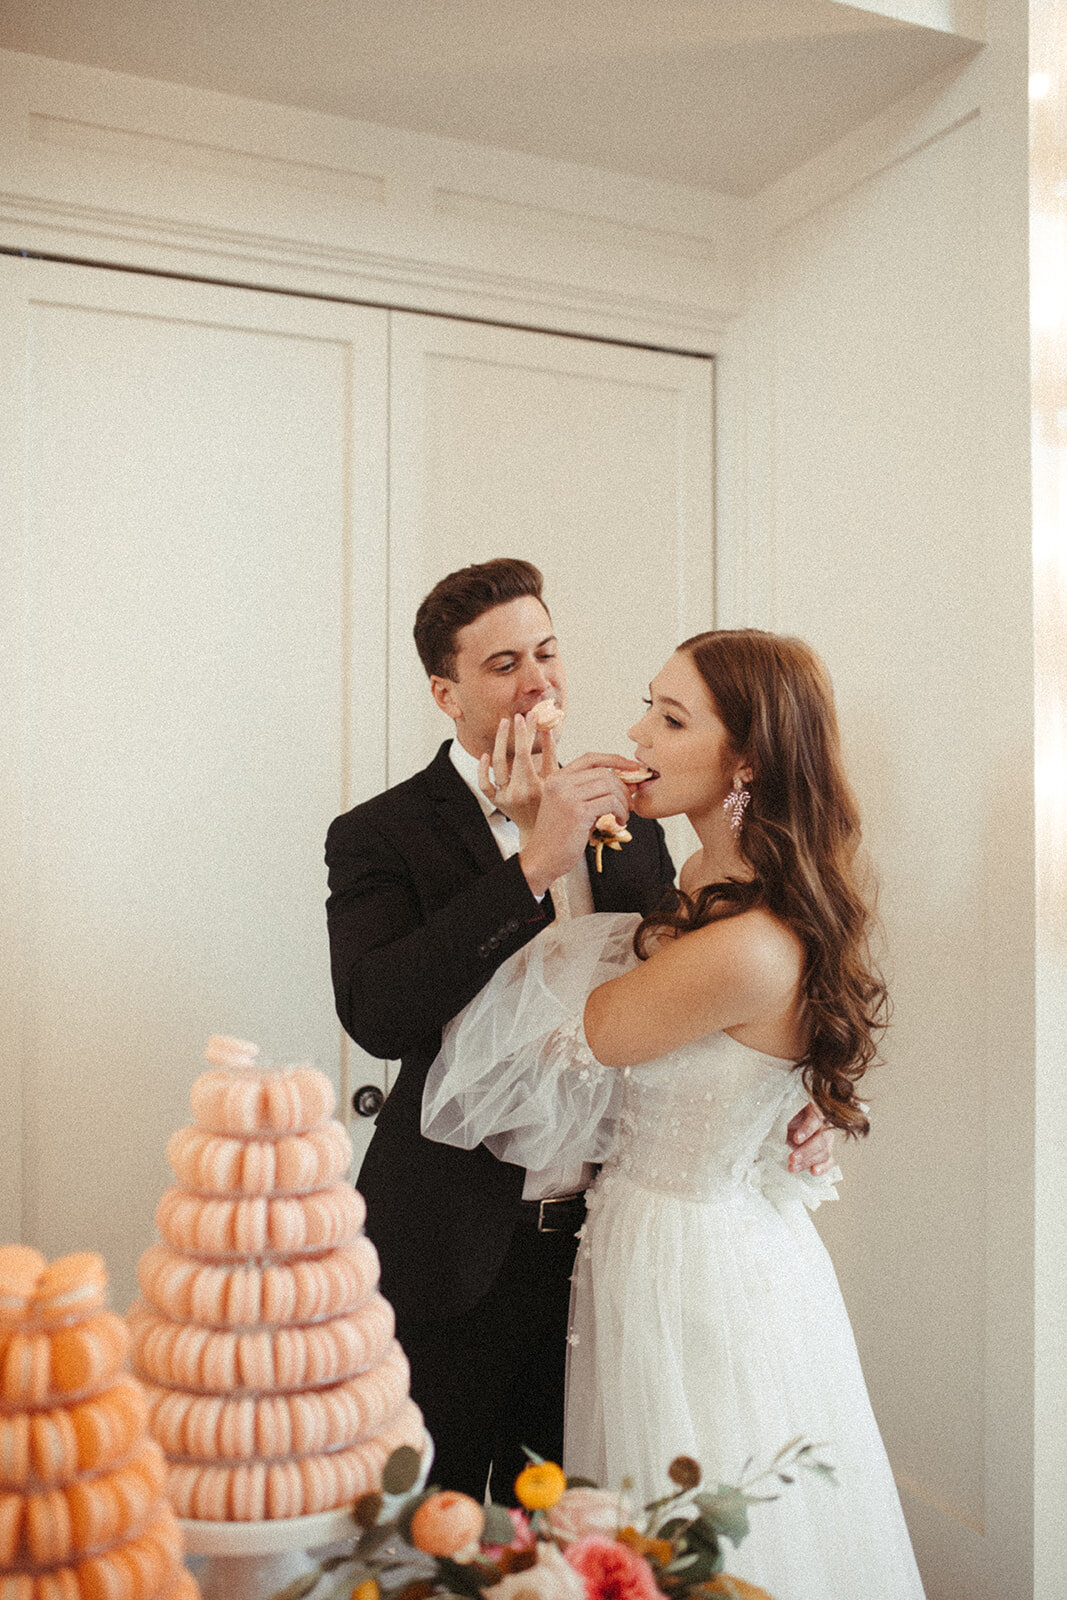 A bride and groom wearing a white wedding gown and black tuxedo feed macaroons to each other next to the dessert table.